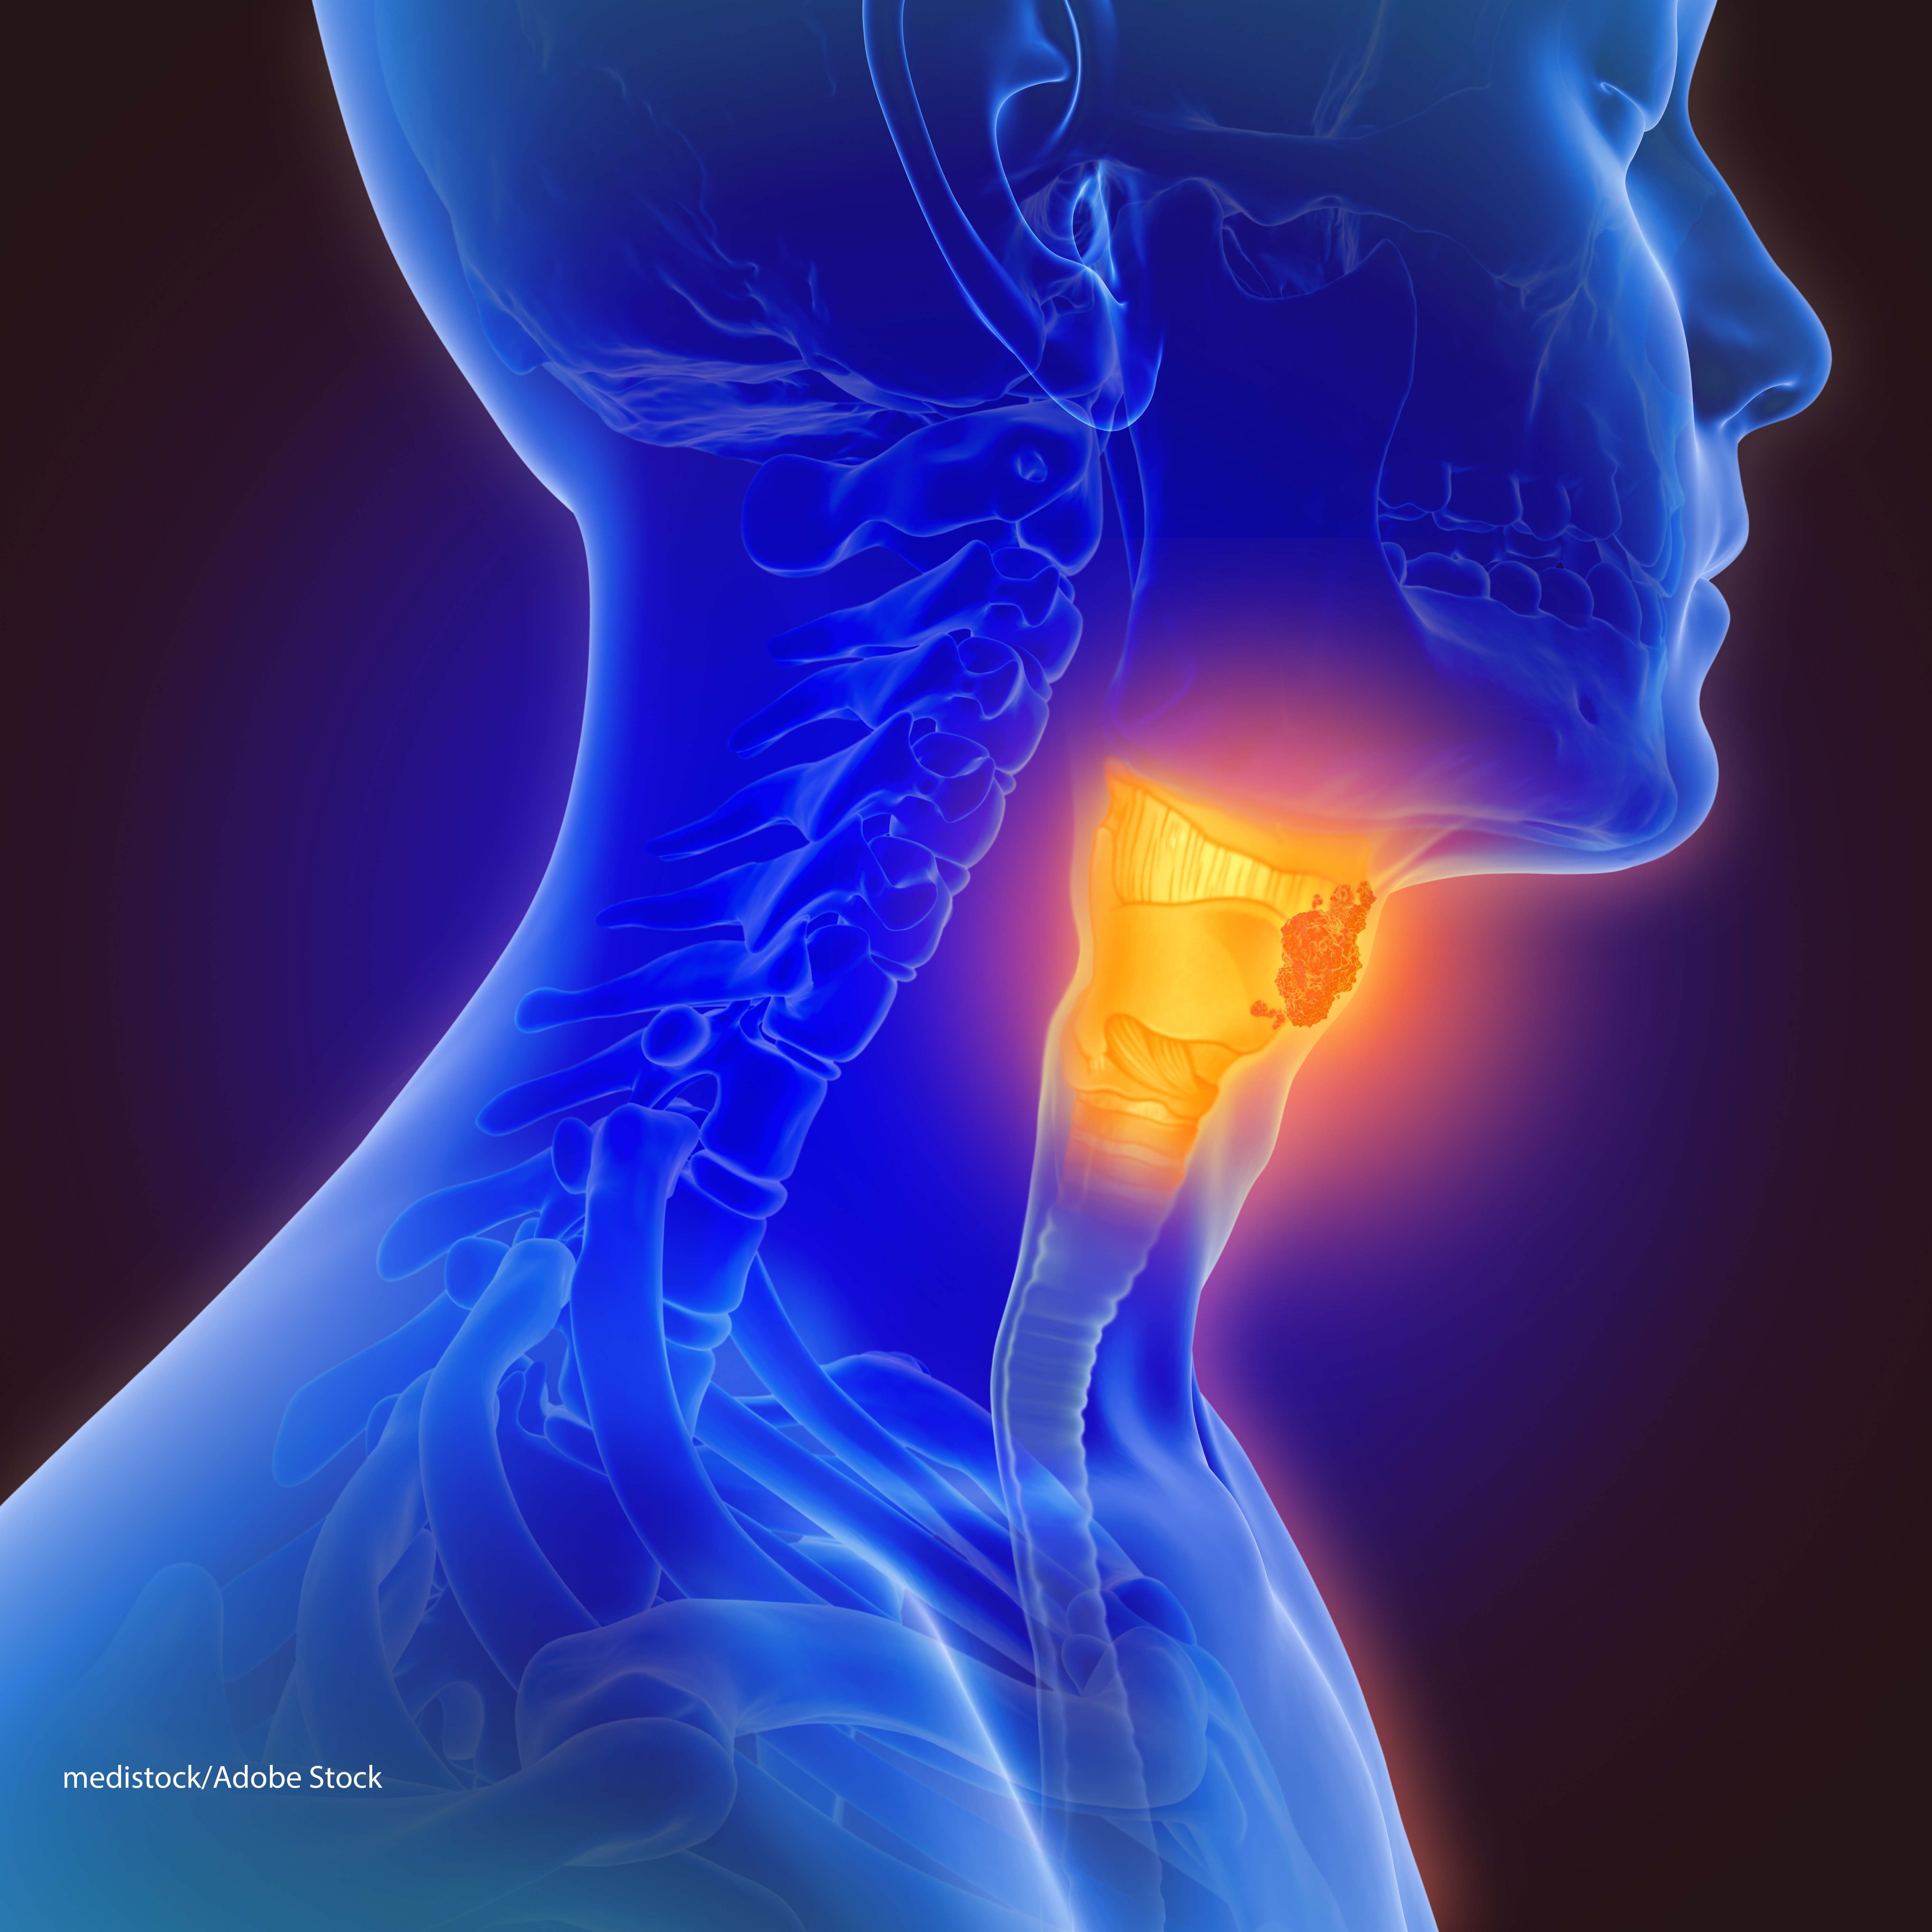 hpv throat and neck cancer hpv virus and life insurance